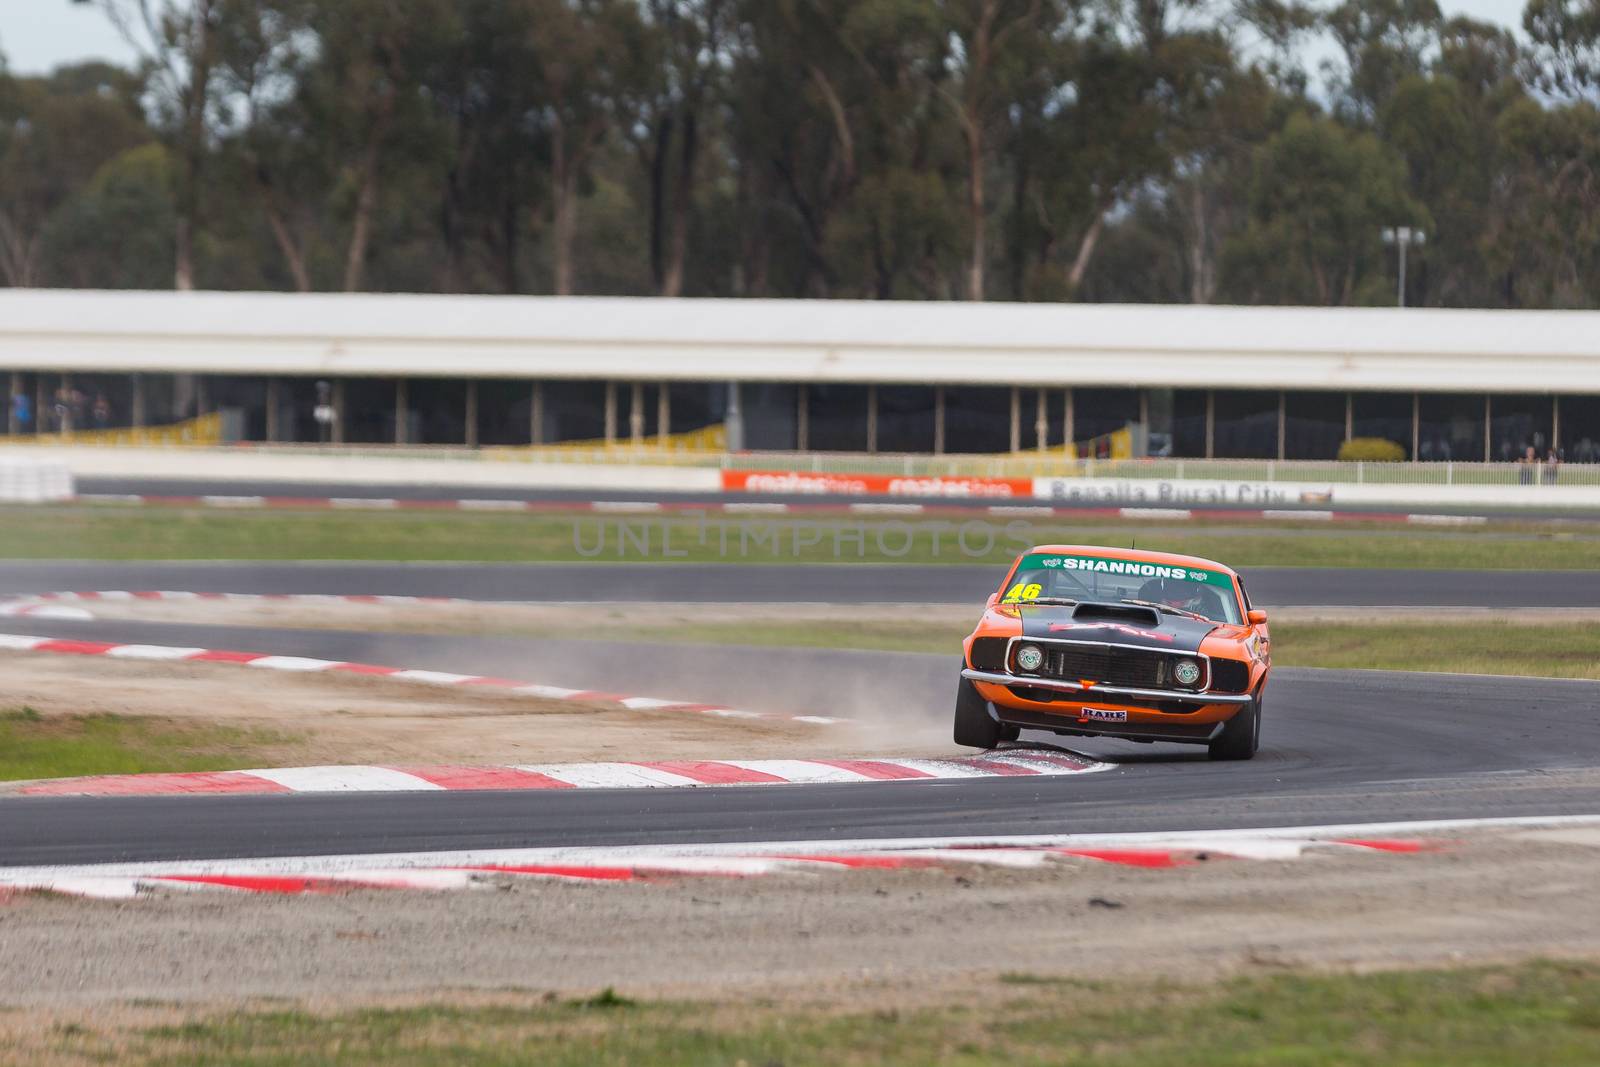 MELBOURNE, WINTON/AUSTRALIA, 20 MAY , 2016: Leo Tobin's Ford Mustang sees air in the Touring Car Masters Series, Round 3 at Winton